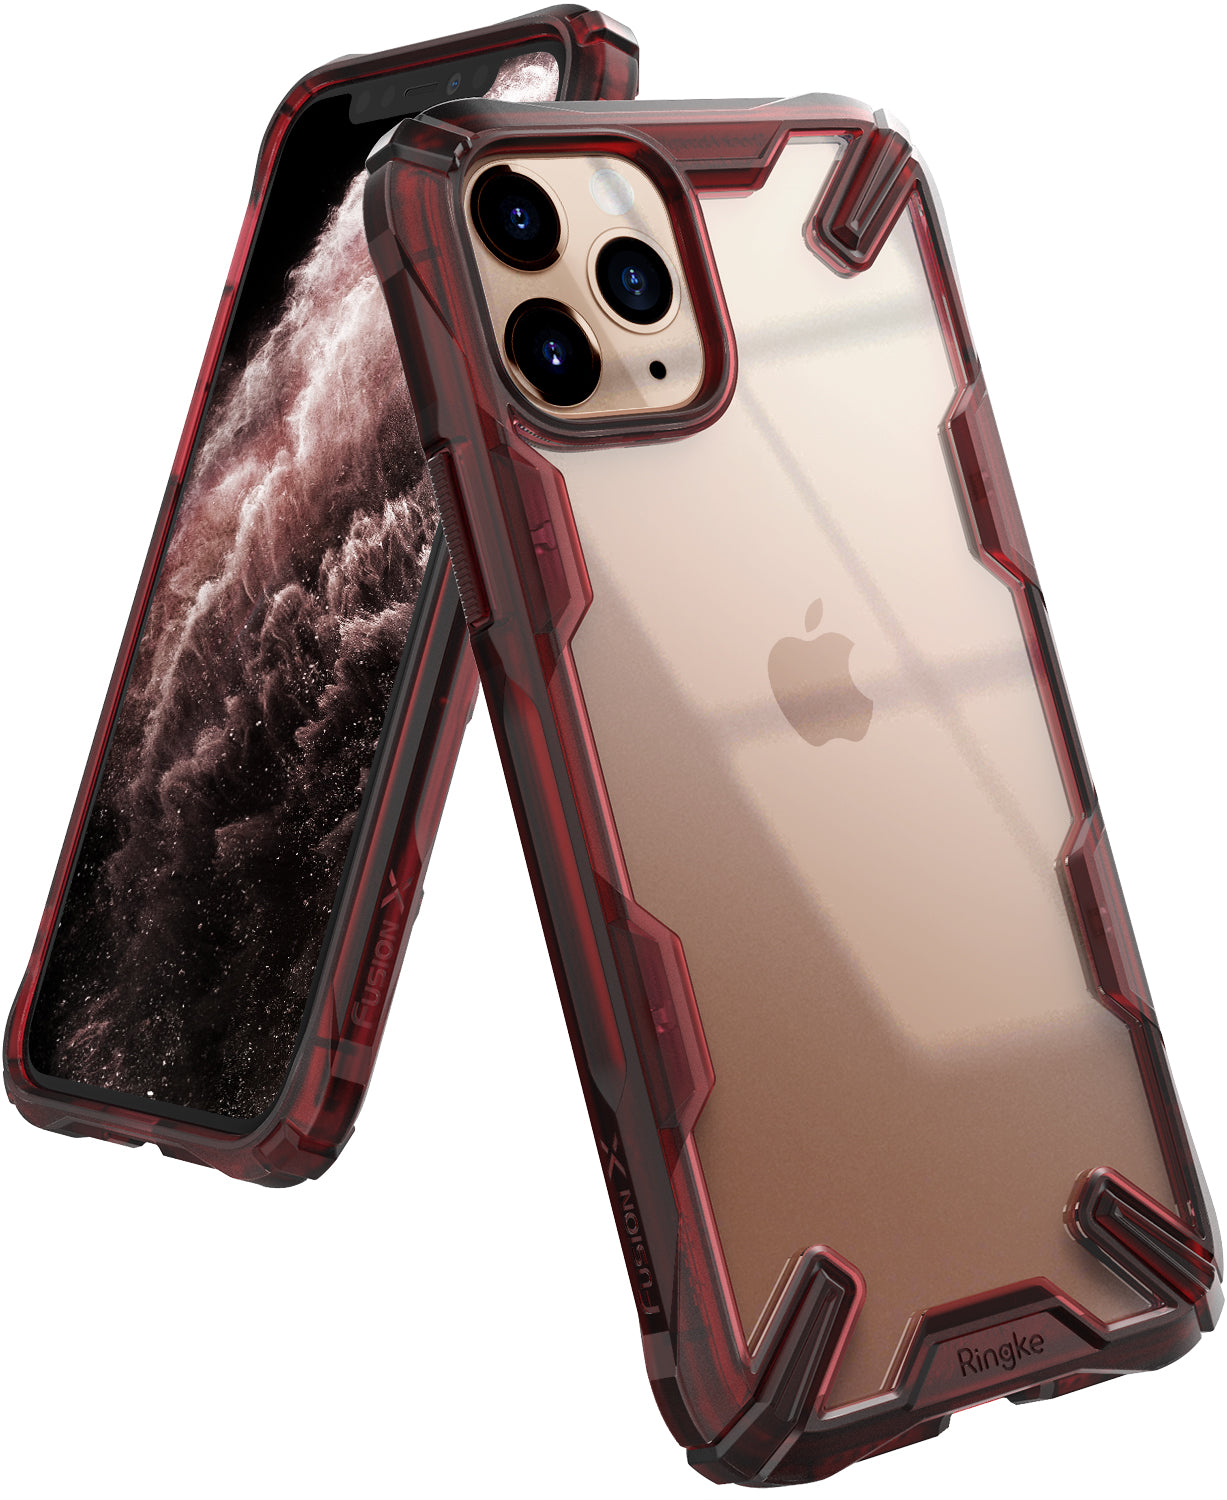 Ringke Fusion X Designed for iPhone 11 Pro Case iPhone XI Pro Case Cover (2019)